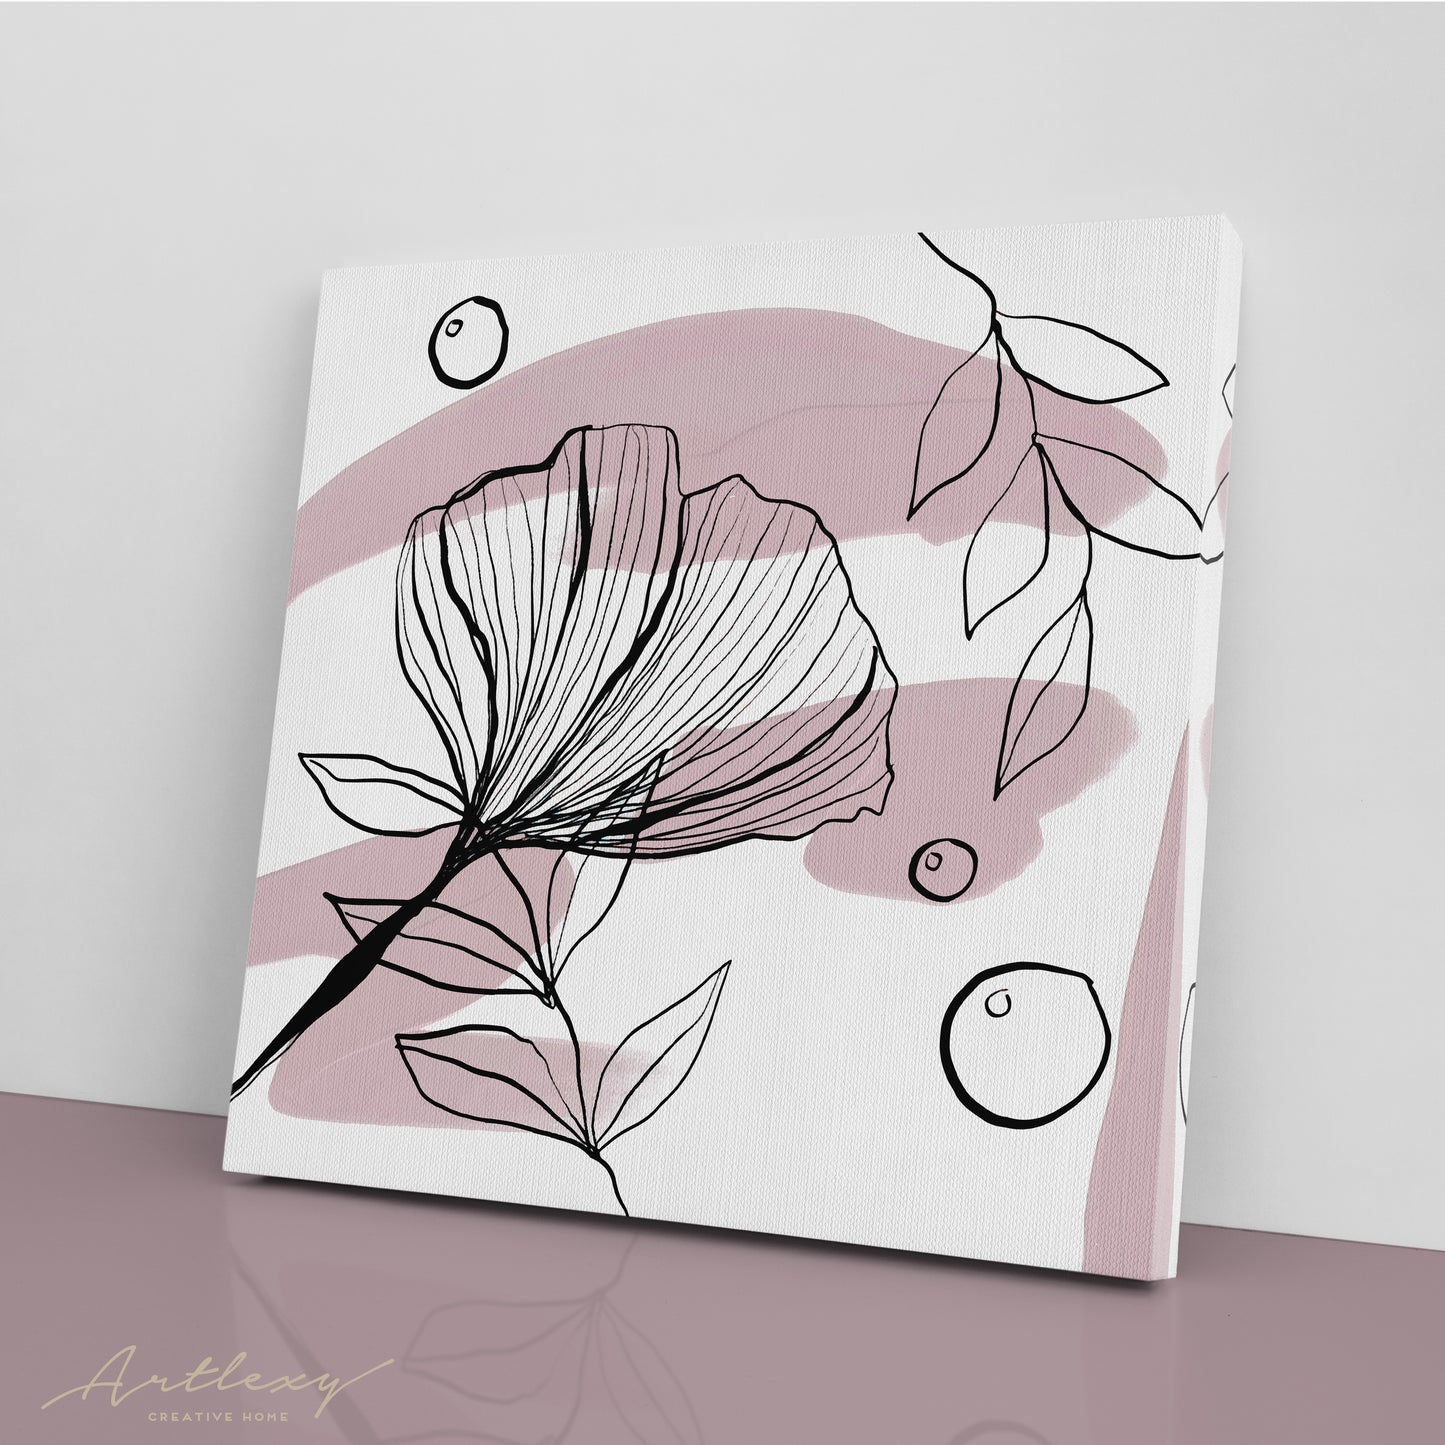 Creative Contemporary Leaves Pattern Canvas Print ArtLexy   